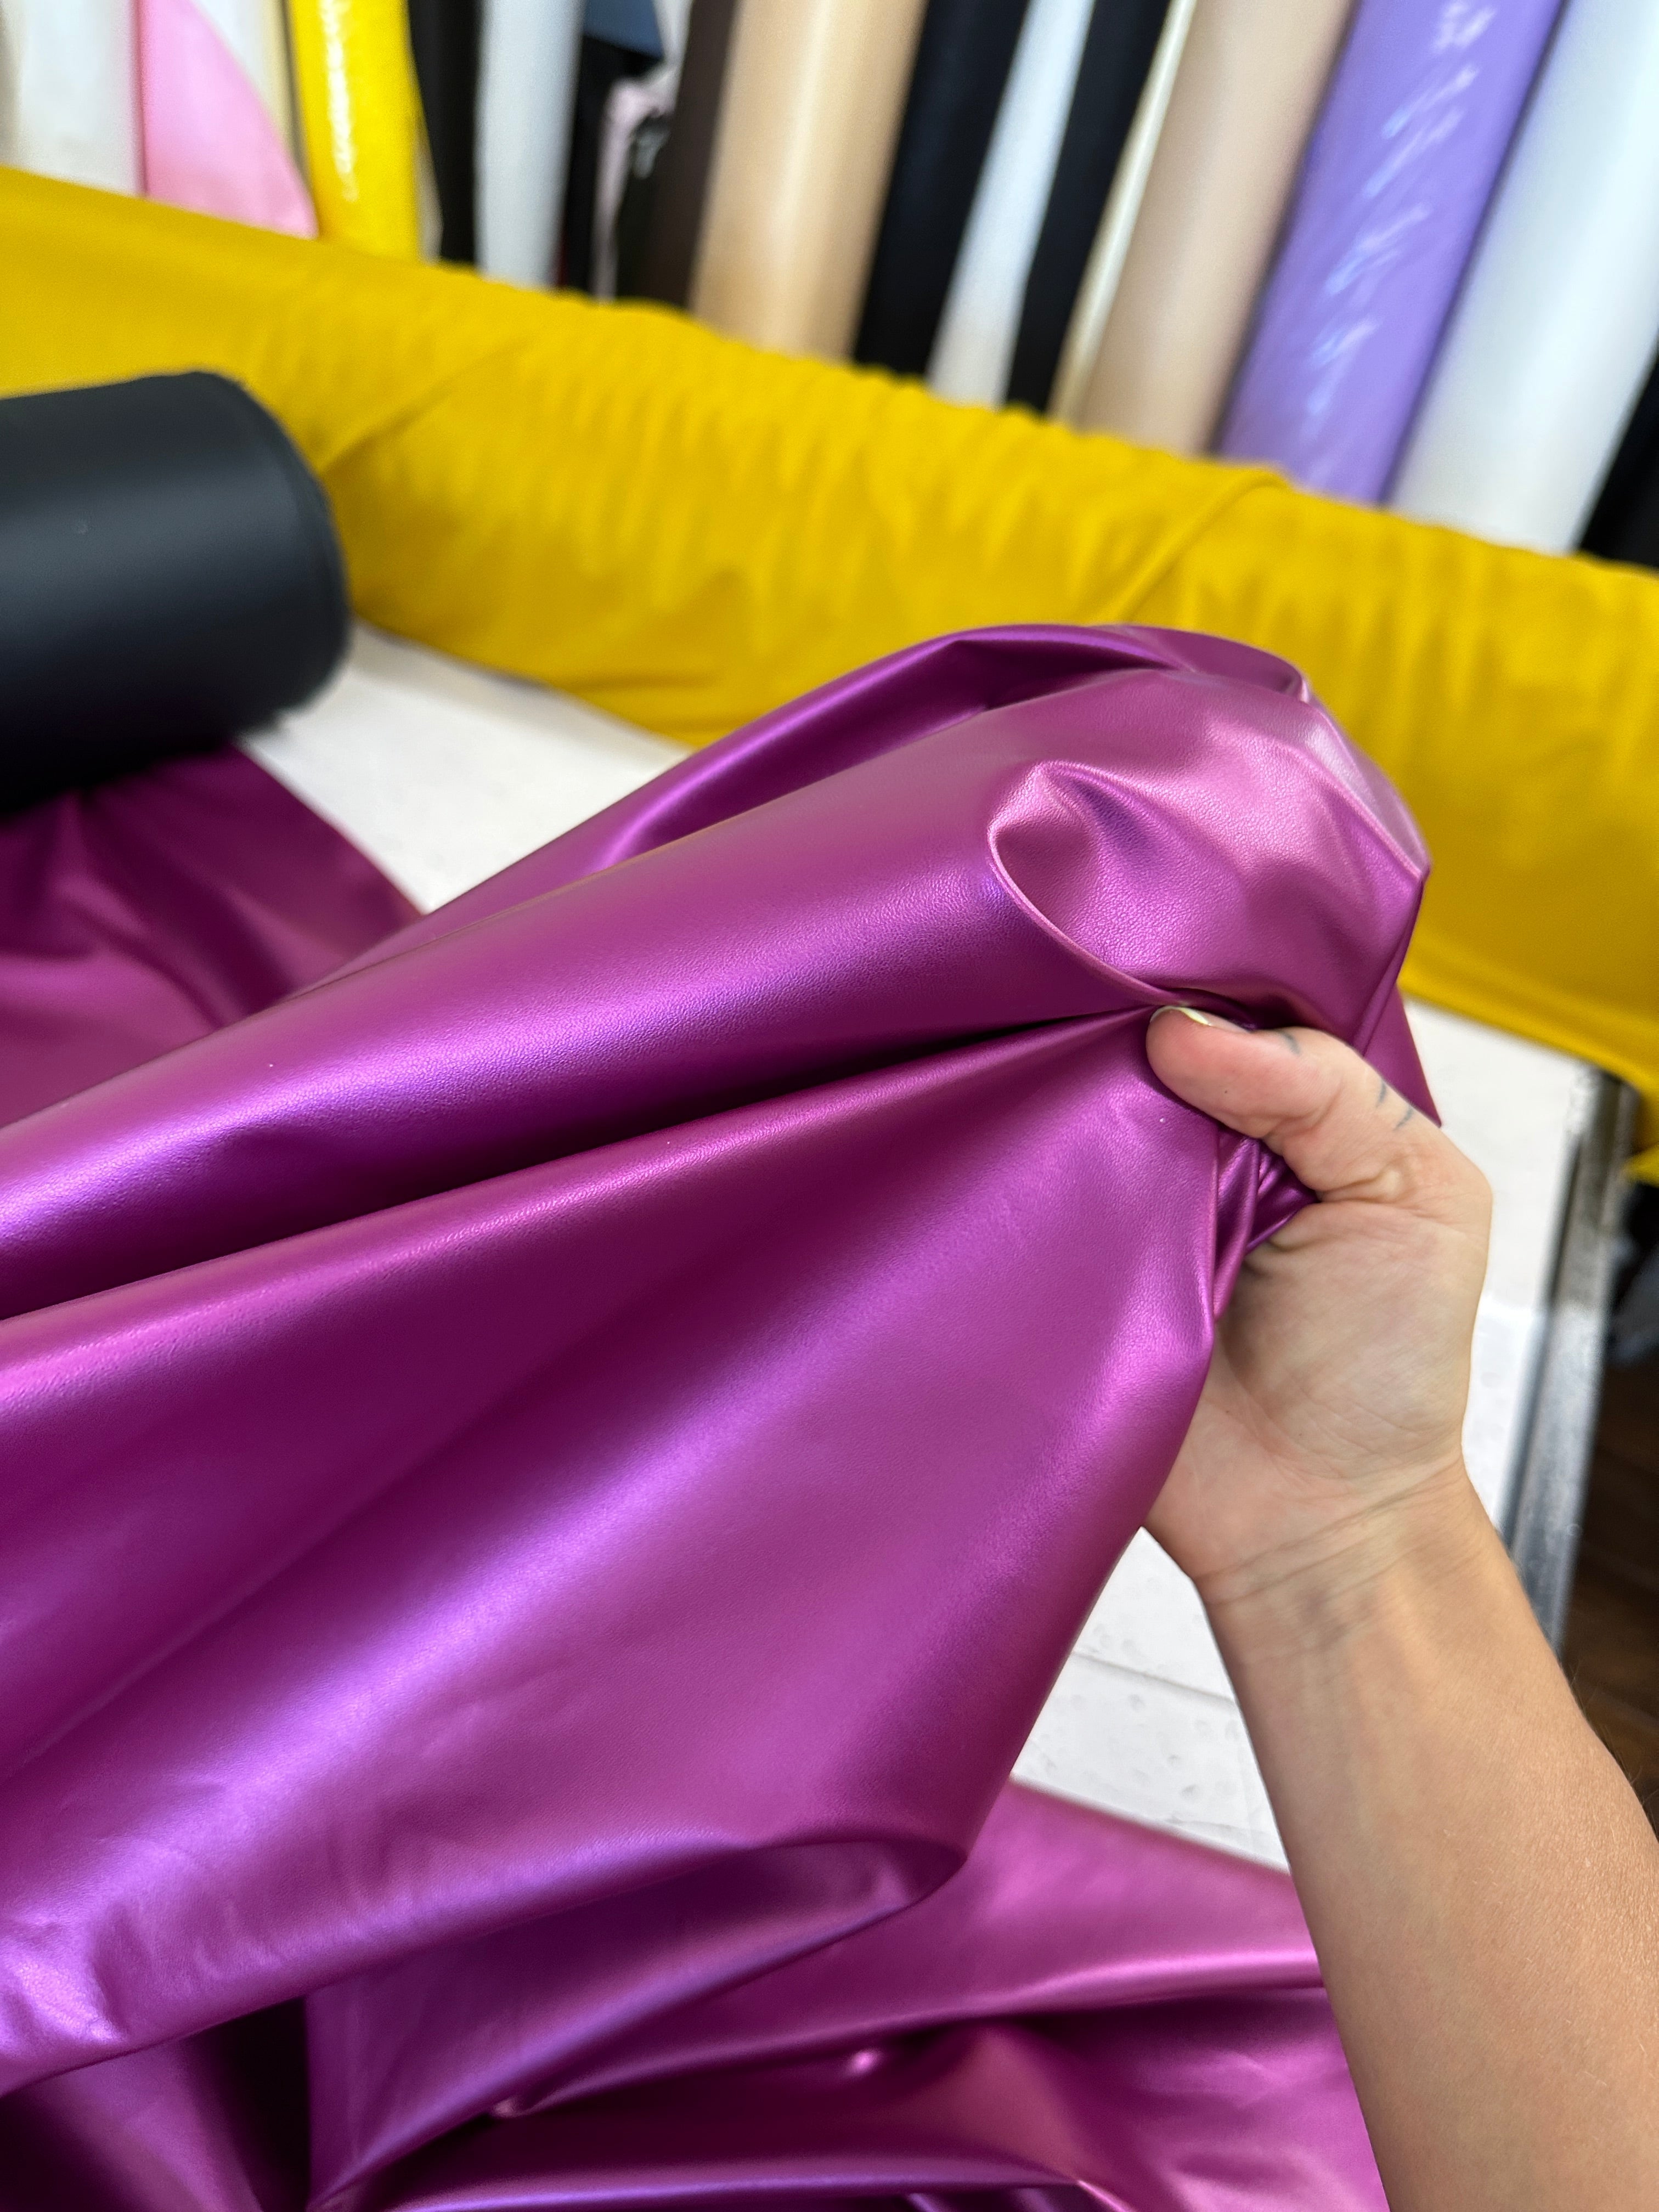 Magenta Metallic Stretch Faux Leather, purple metallic stretch leather, shiny faux leather, mauve faux leather for woman, faux leather for costumes, faux leather for home decor, 2 way stretch faux leather, leather for blazers, cheap leather, discounted leather, leather on sale